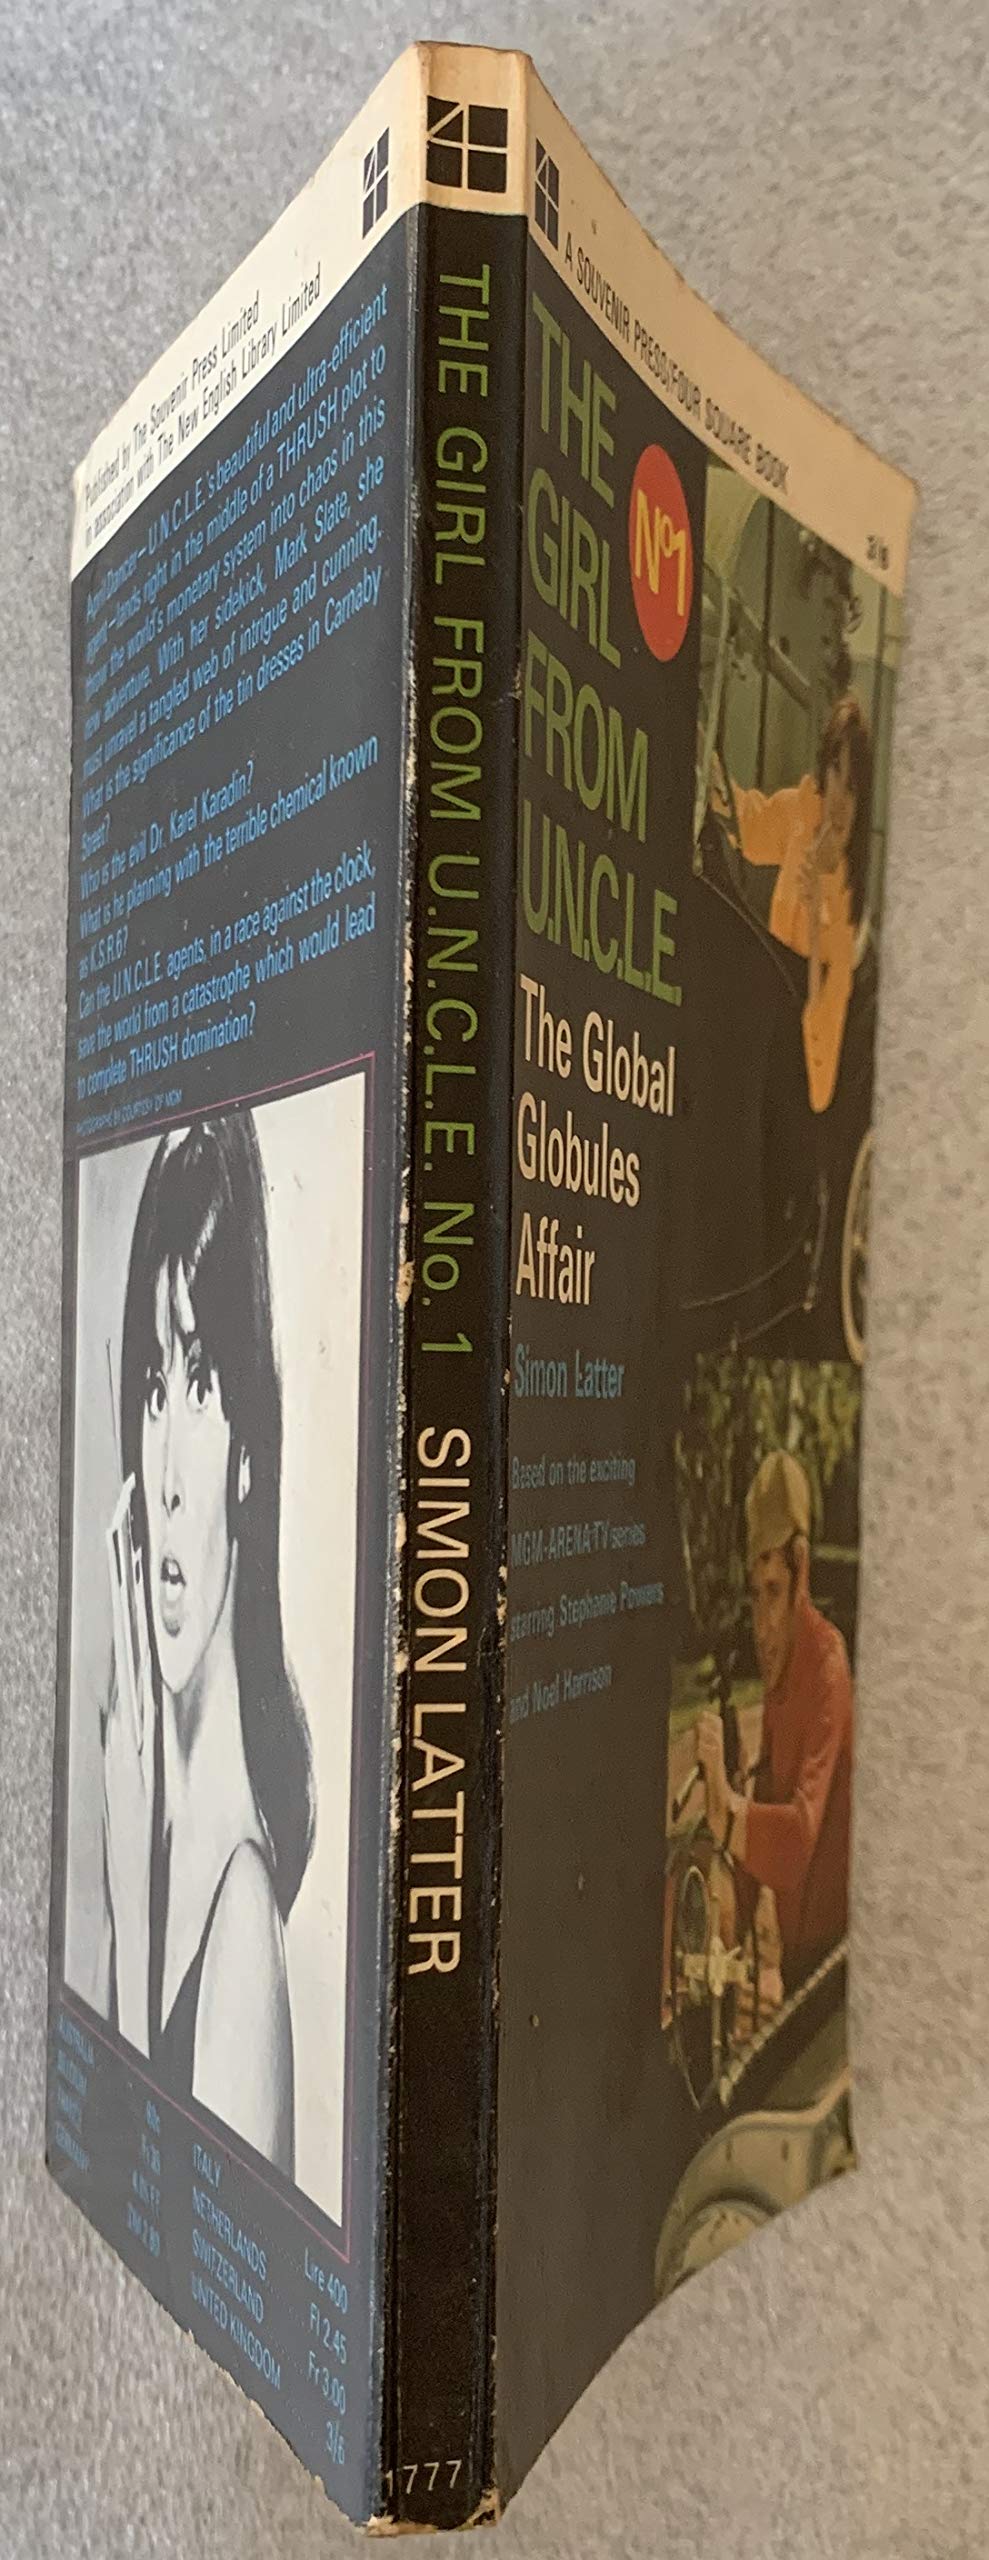 Vintage 1967 The Girl From UNCLE No. 1 The Global Globules Affair Paperback Novel By Simon Latter